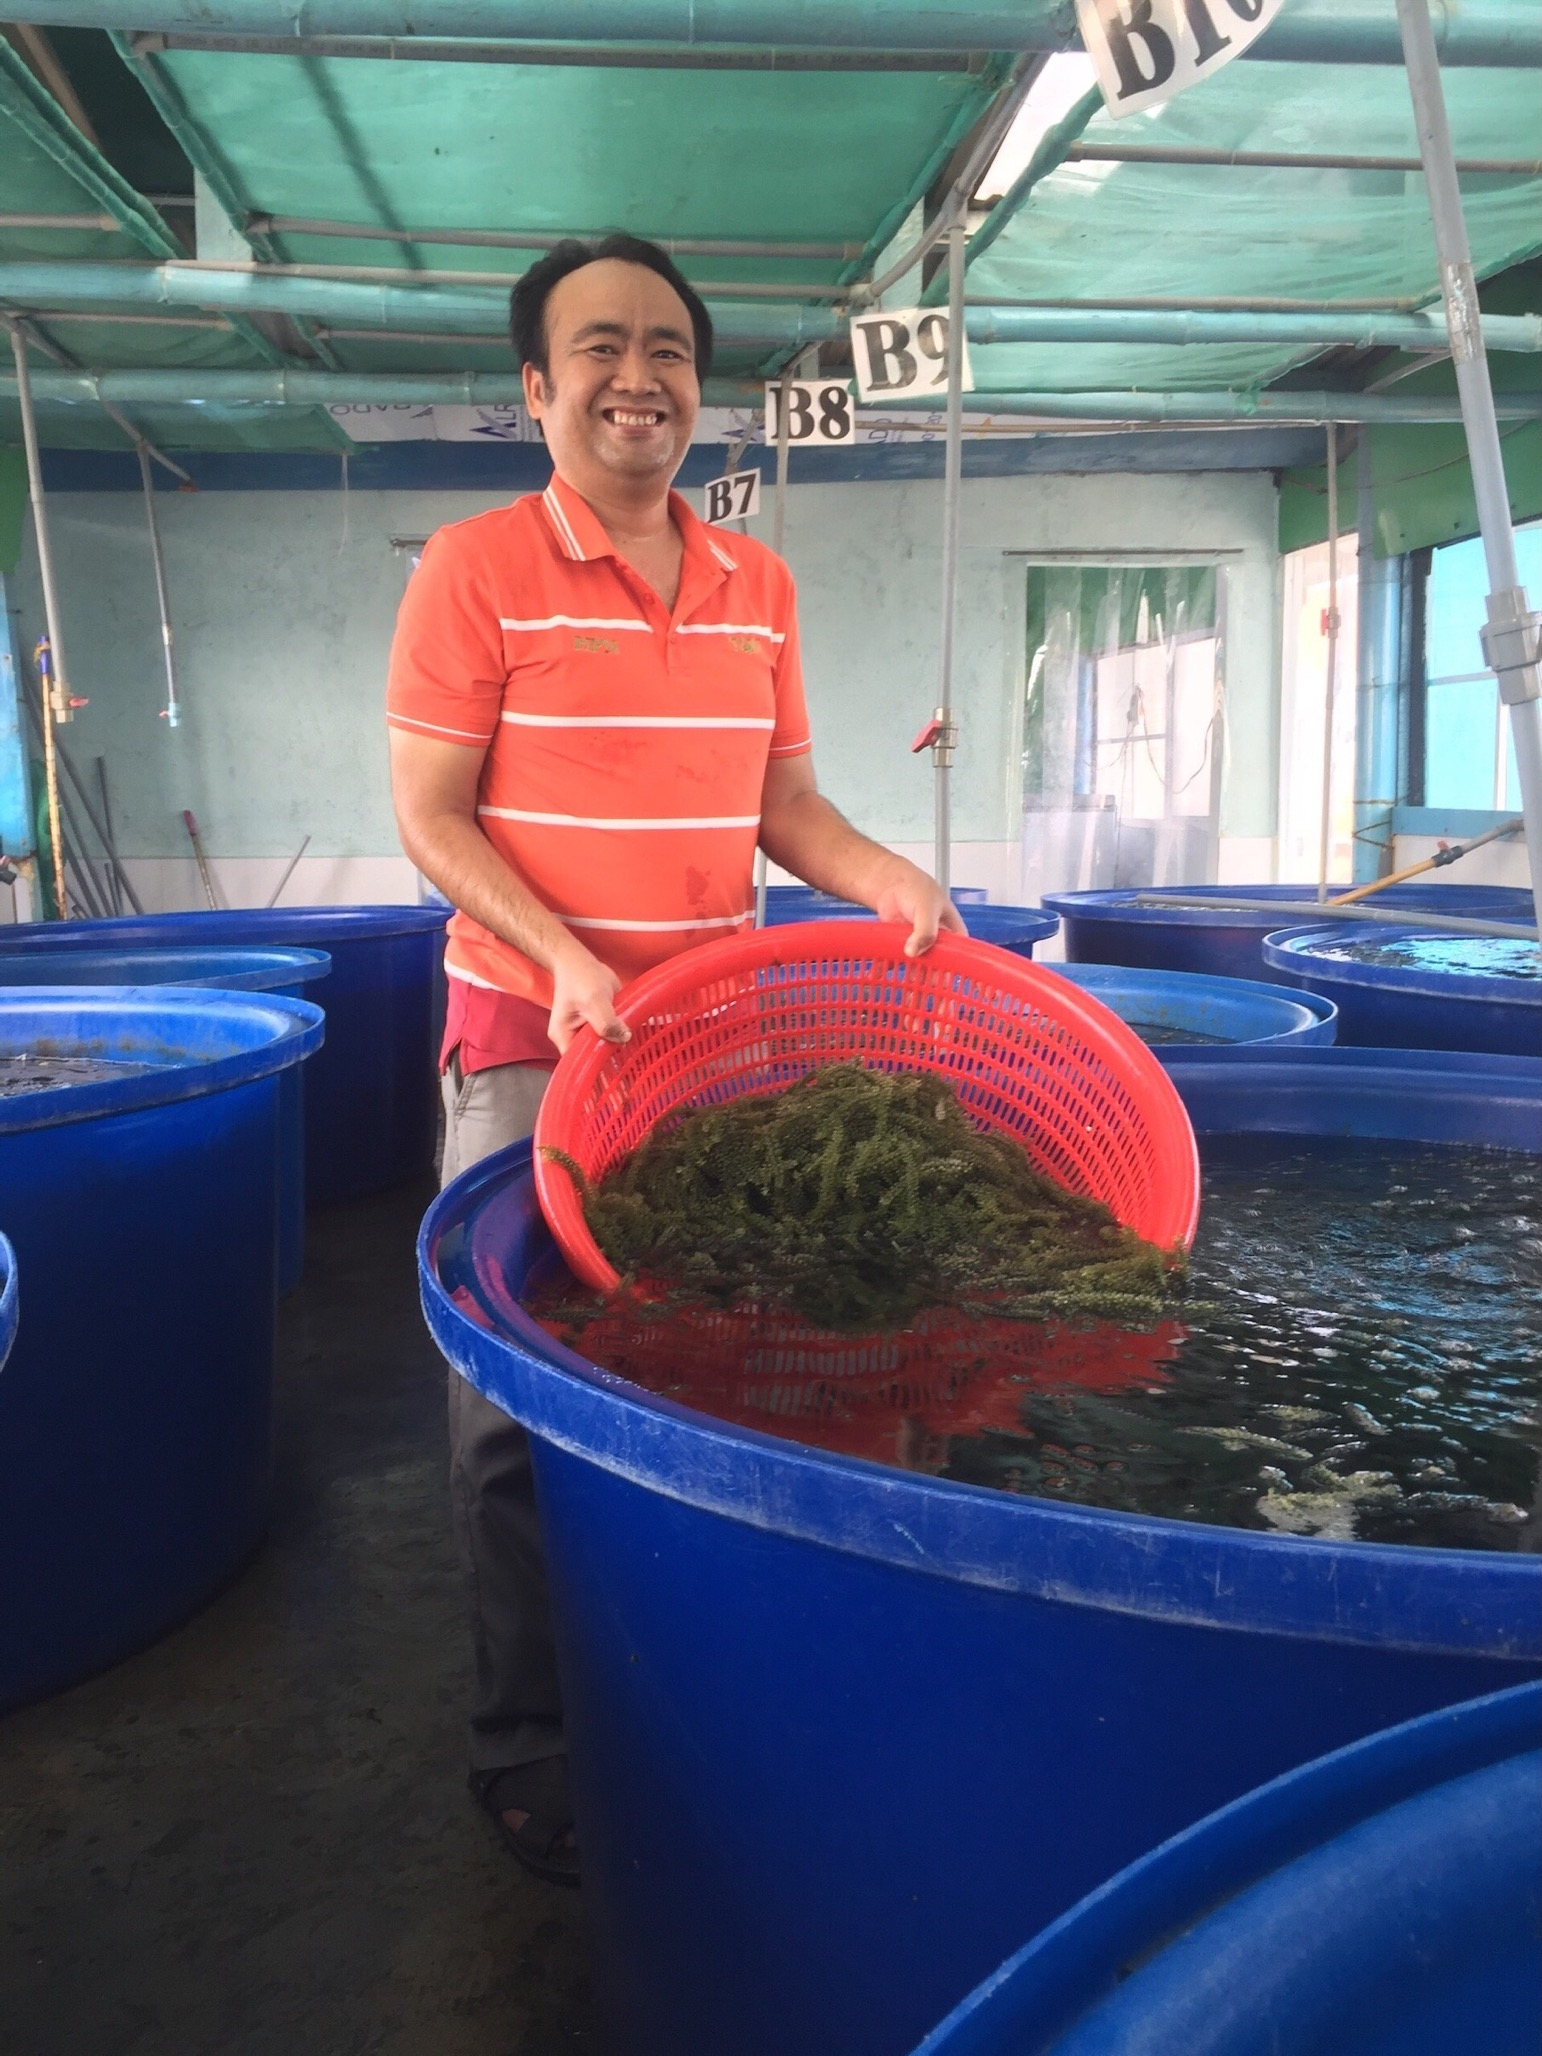 behind longevity sea grapes from petroleum to a pathway driven pioneer in aquaculture